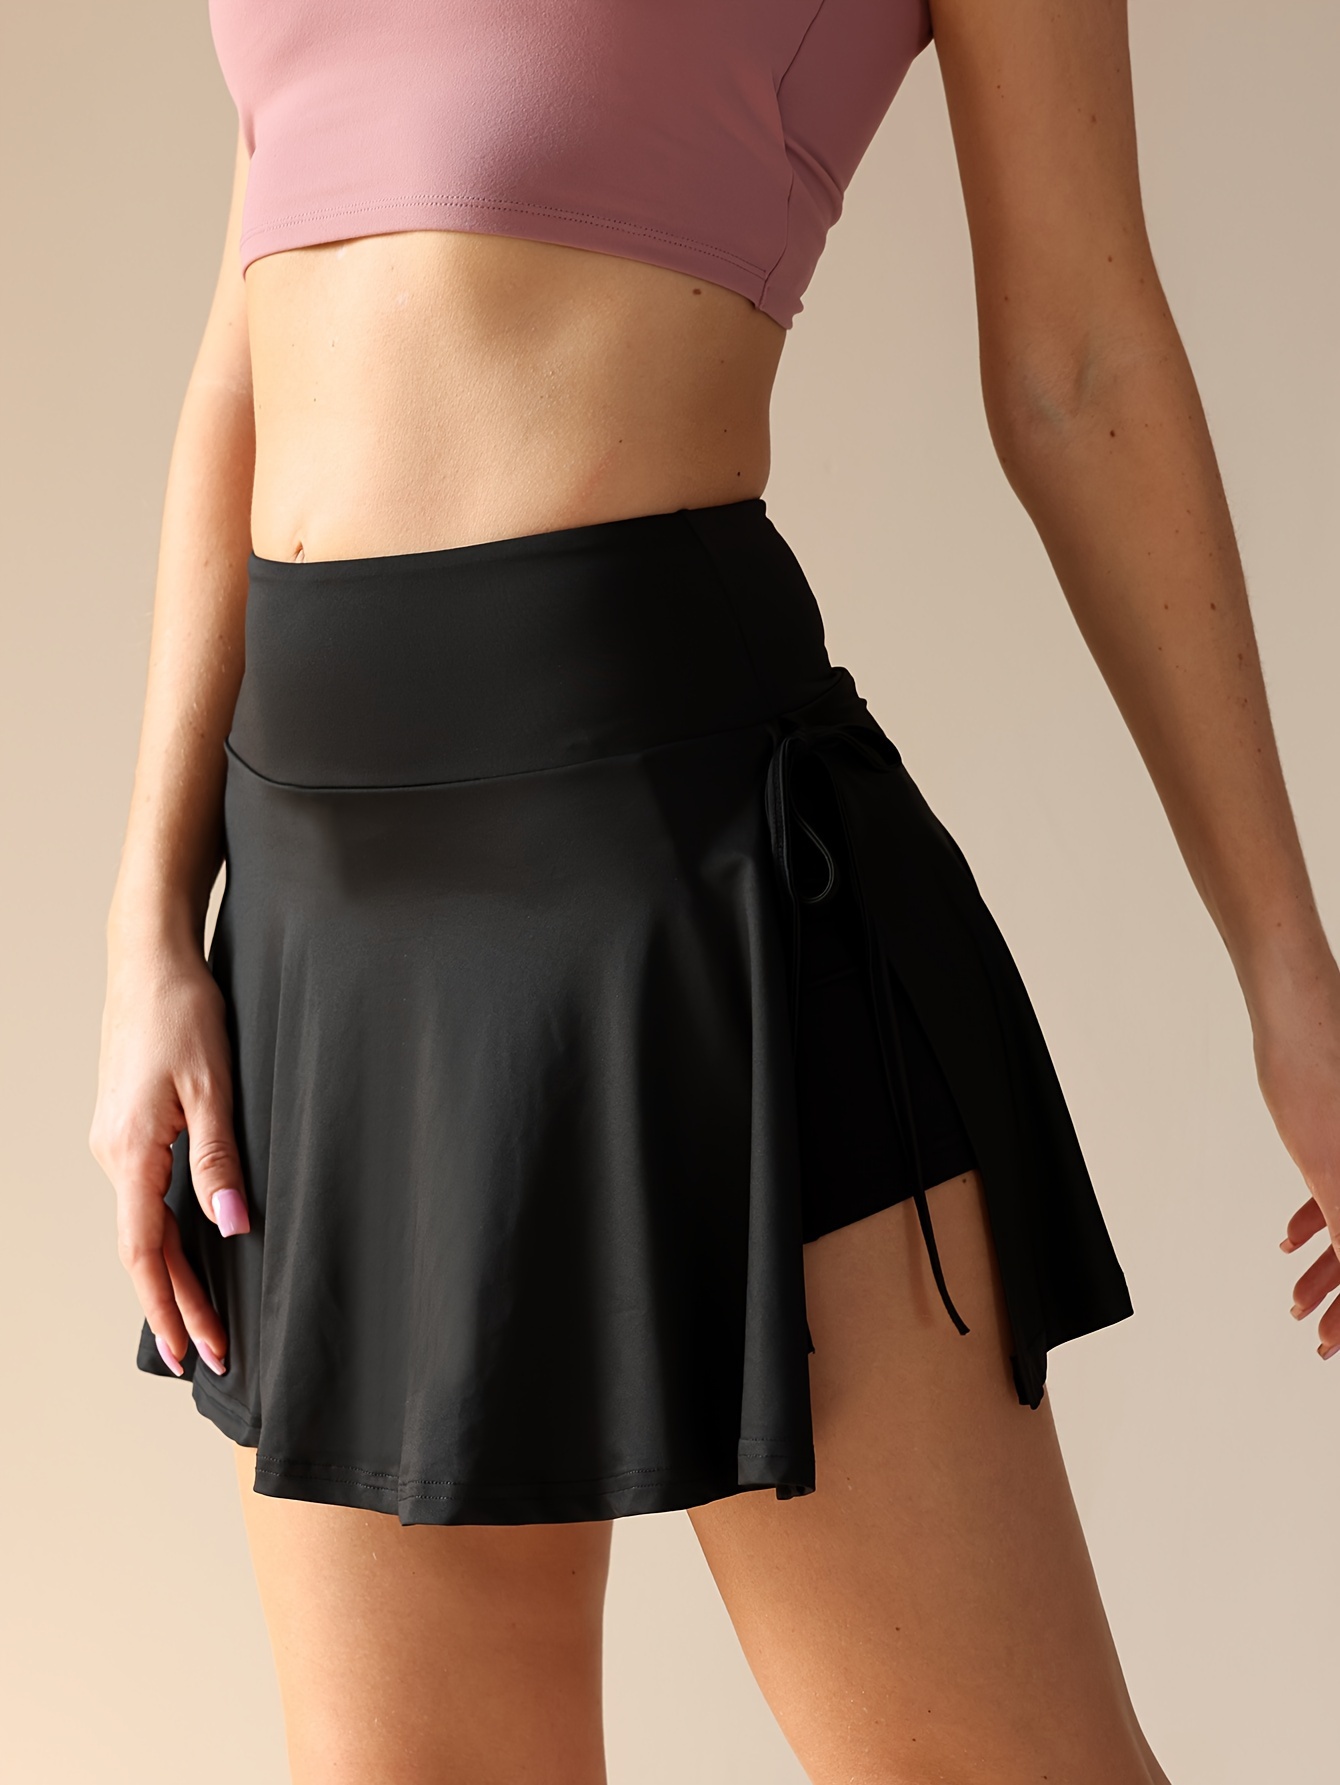 High Quality Womens Quick Dry Yoga In Short Skirt With Pocket For Gym,  Sports, And Summer Dresses Elastic Waist From Luyogaworld, $20.81